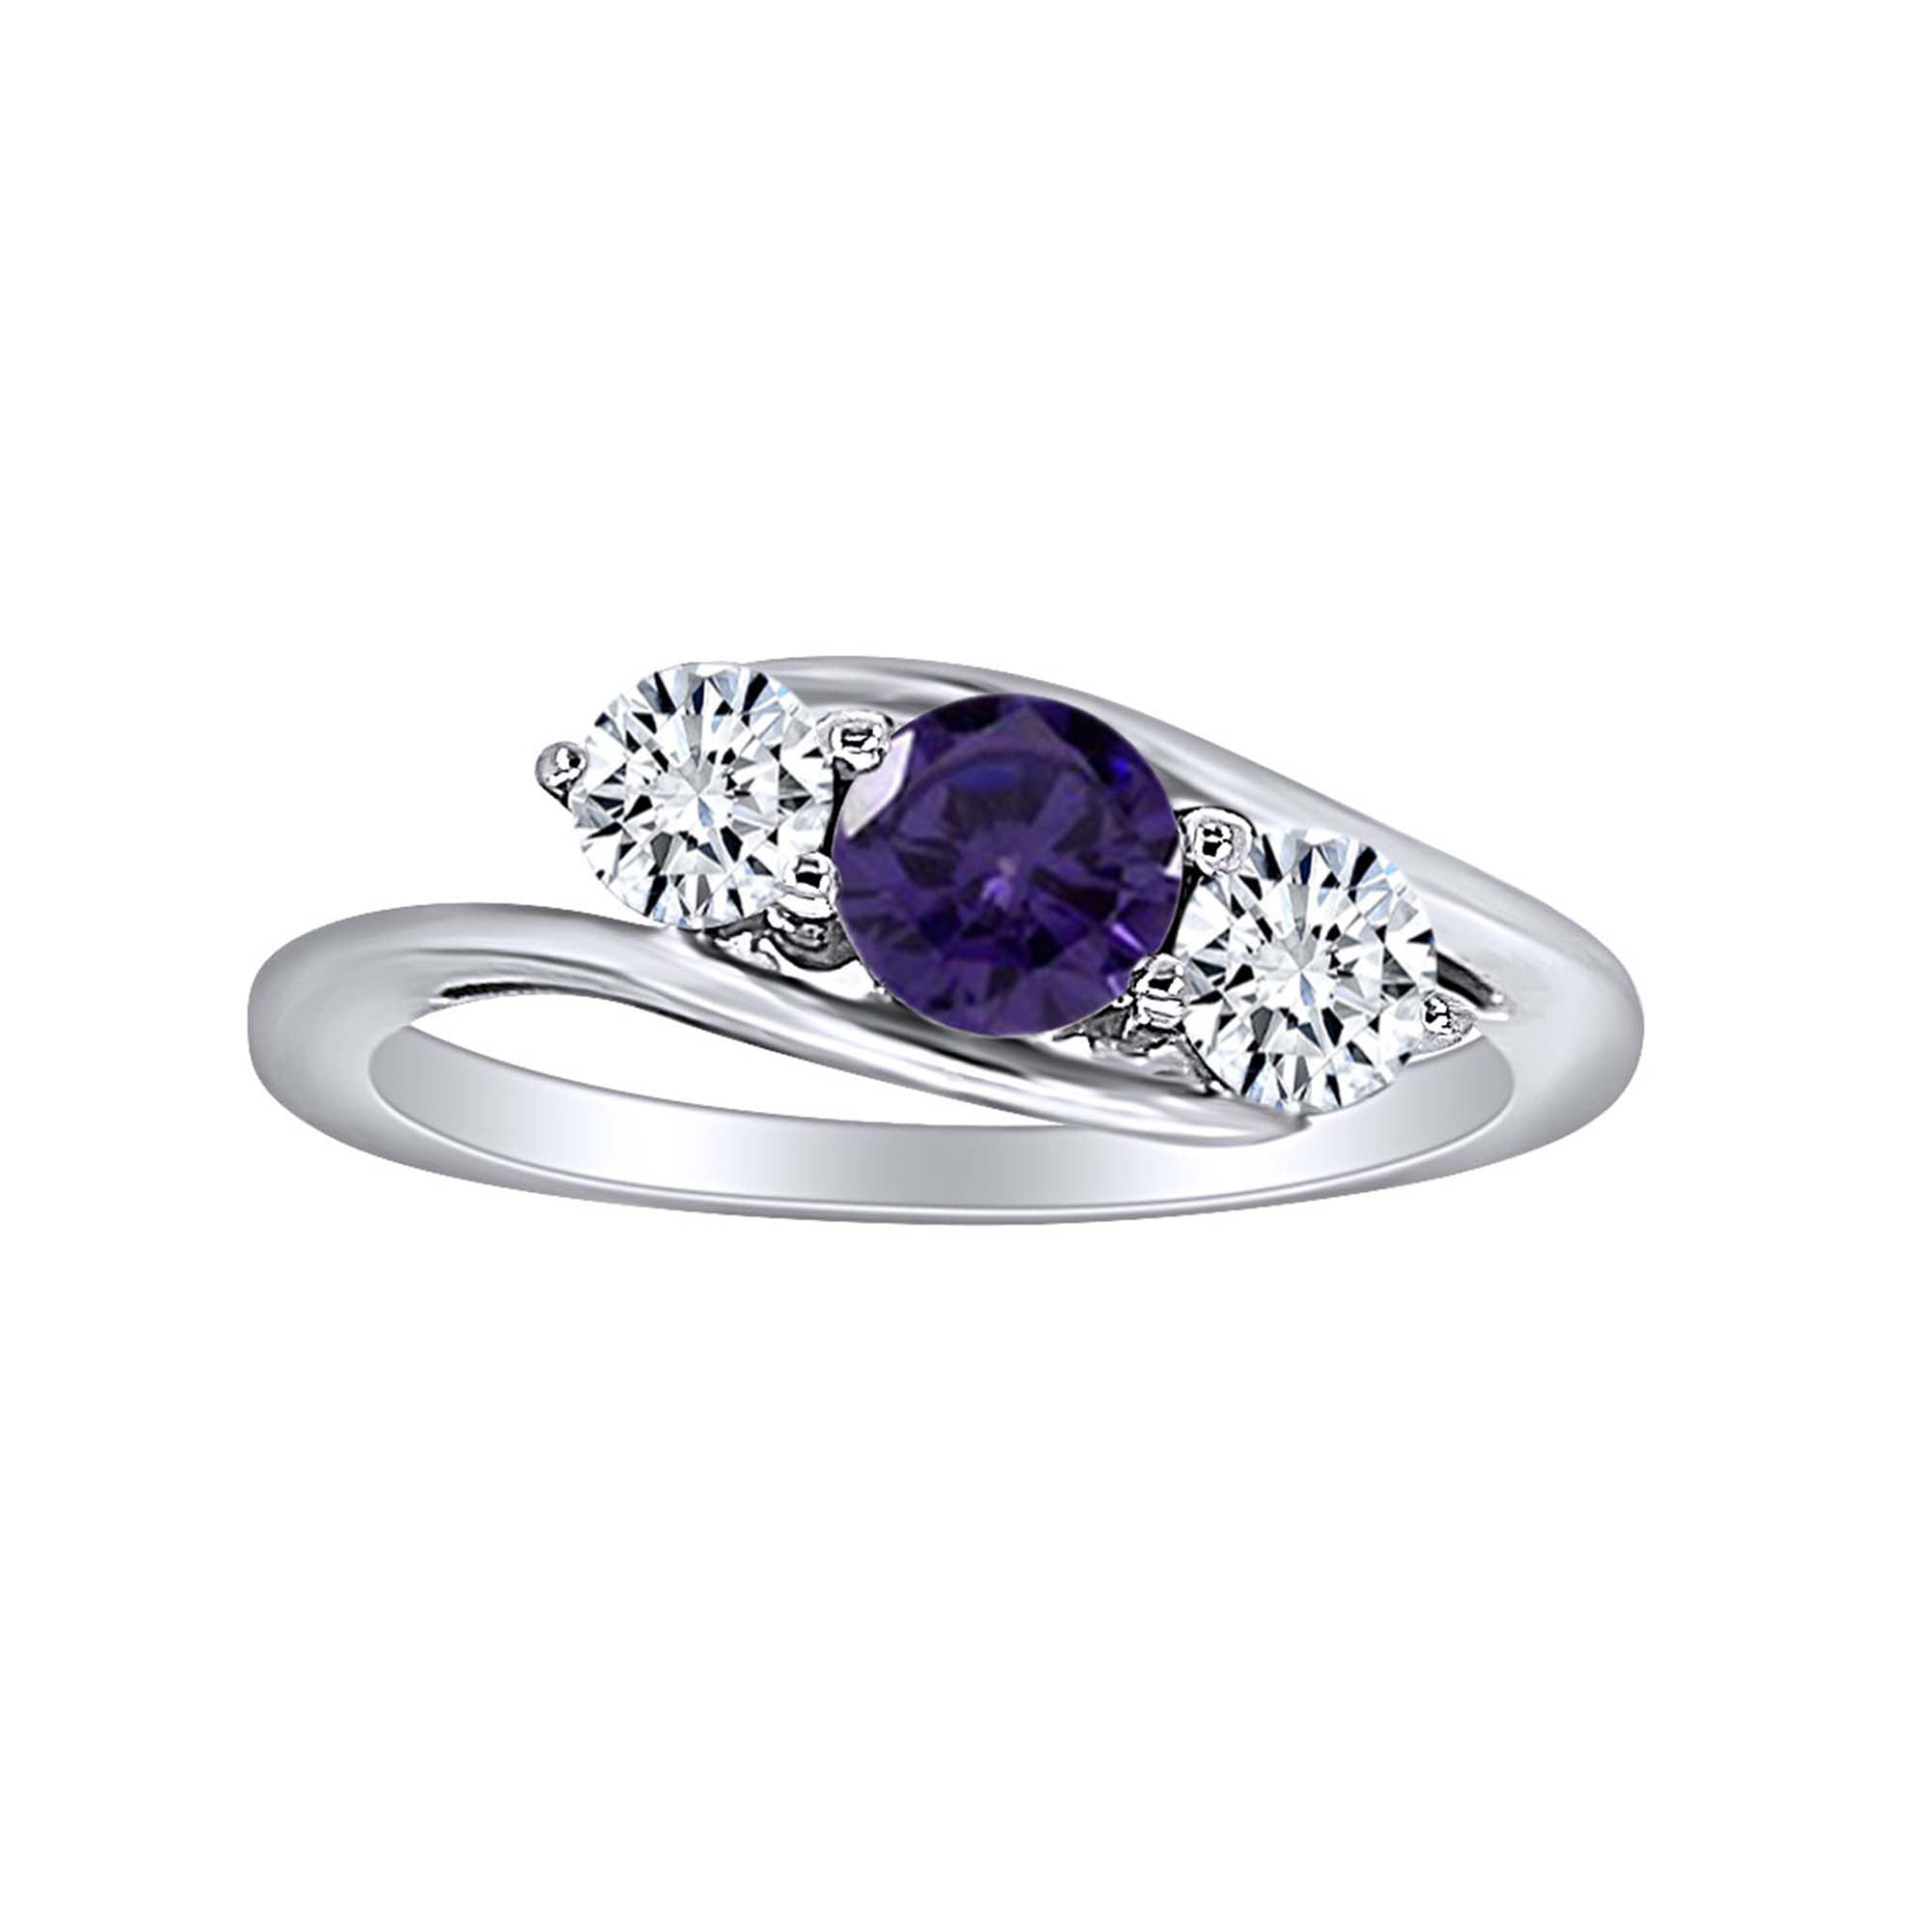 Wishrocks Simulated Birthstone with CZ Mens Wedding Band Ring in 14K White Gold Over Sterling Silver